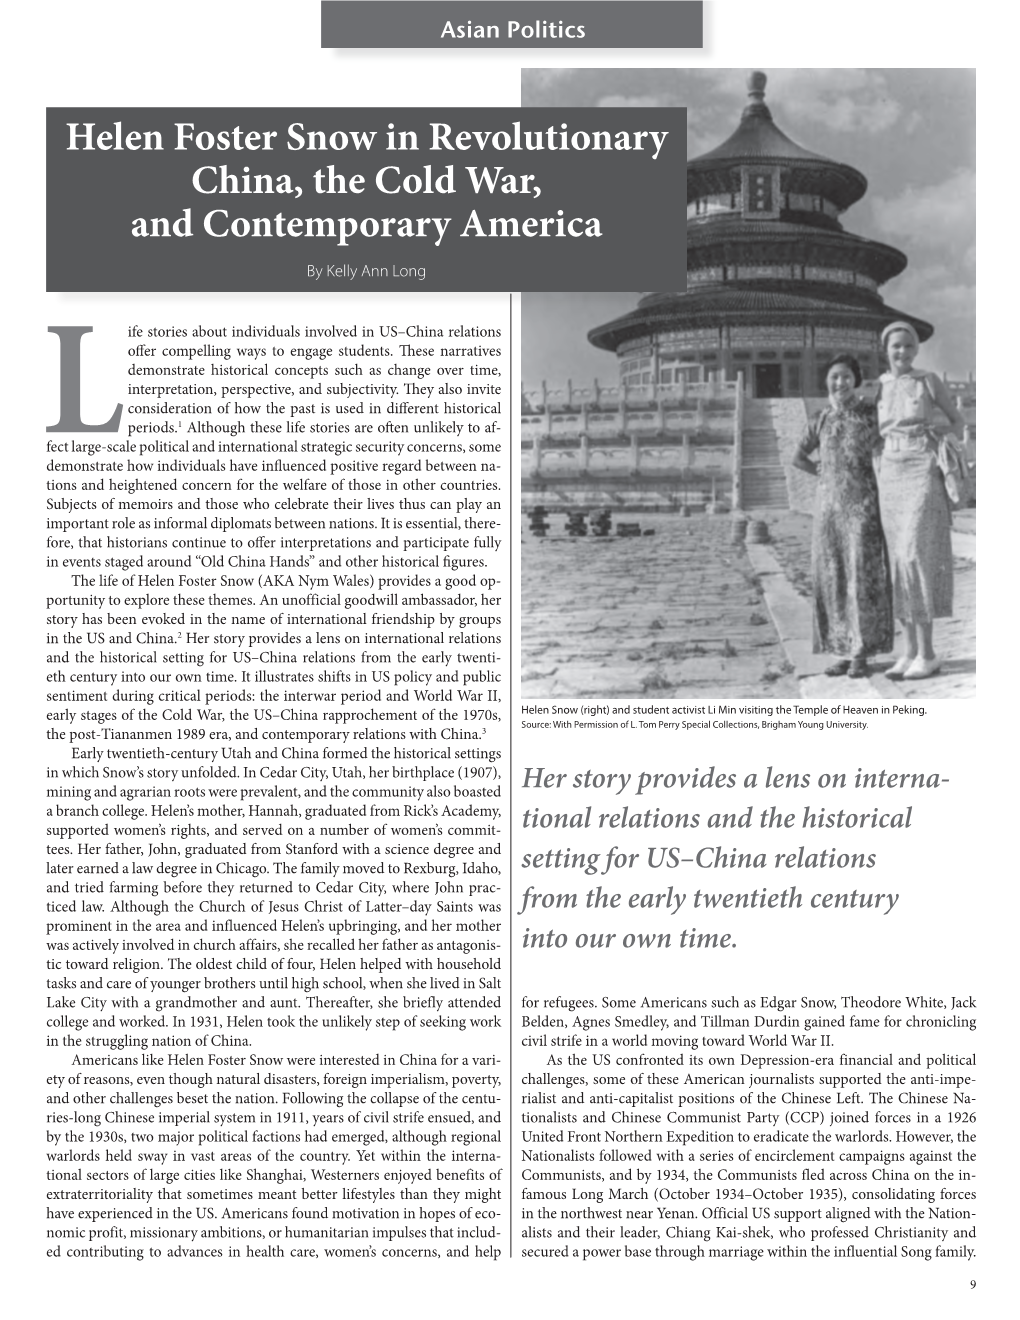 Helen Foster Snow in Revolutionary China, the Cold War, and Contemporary America by Kelly Ann Long